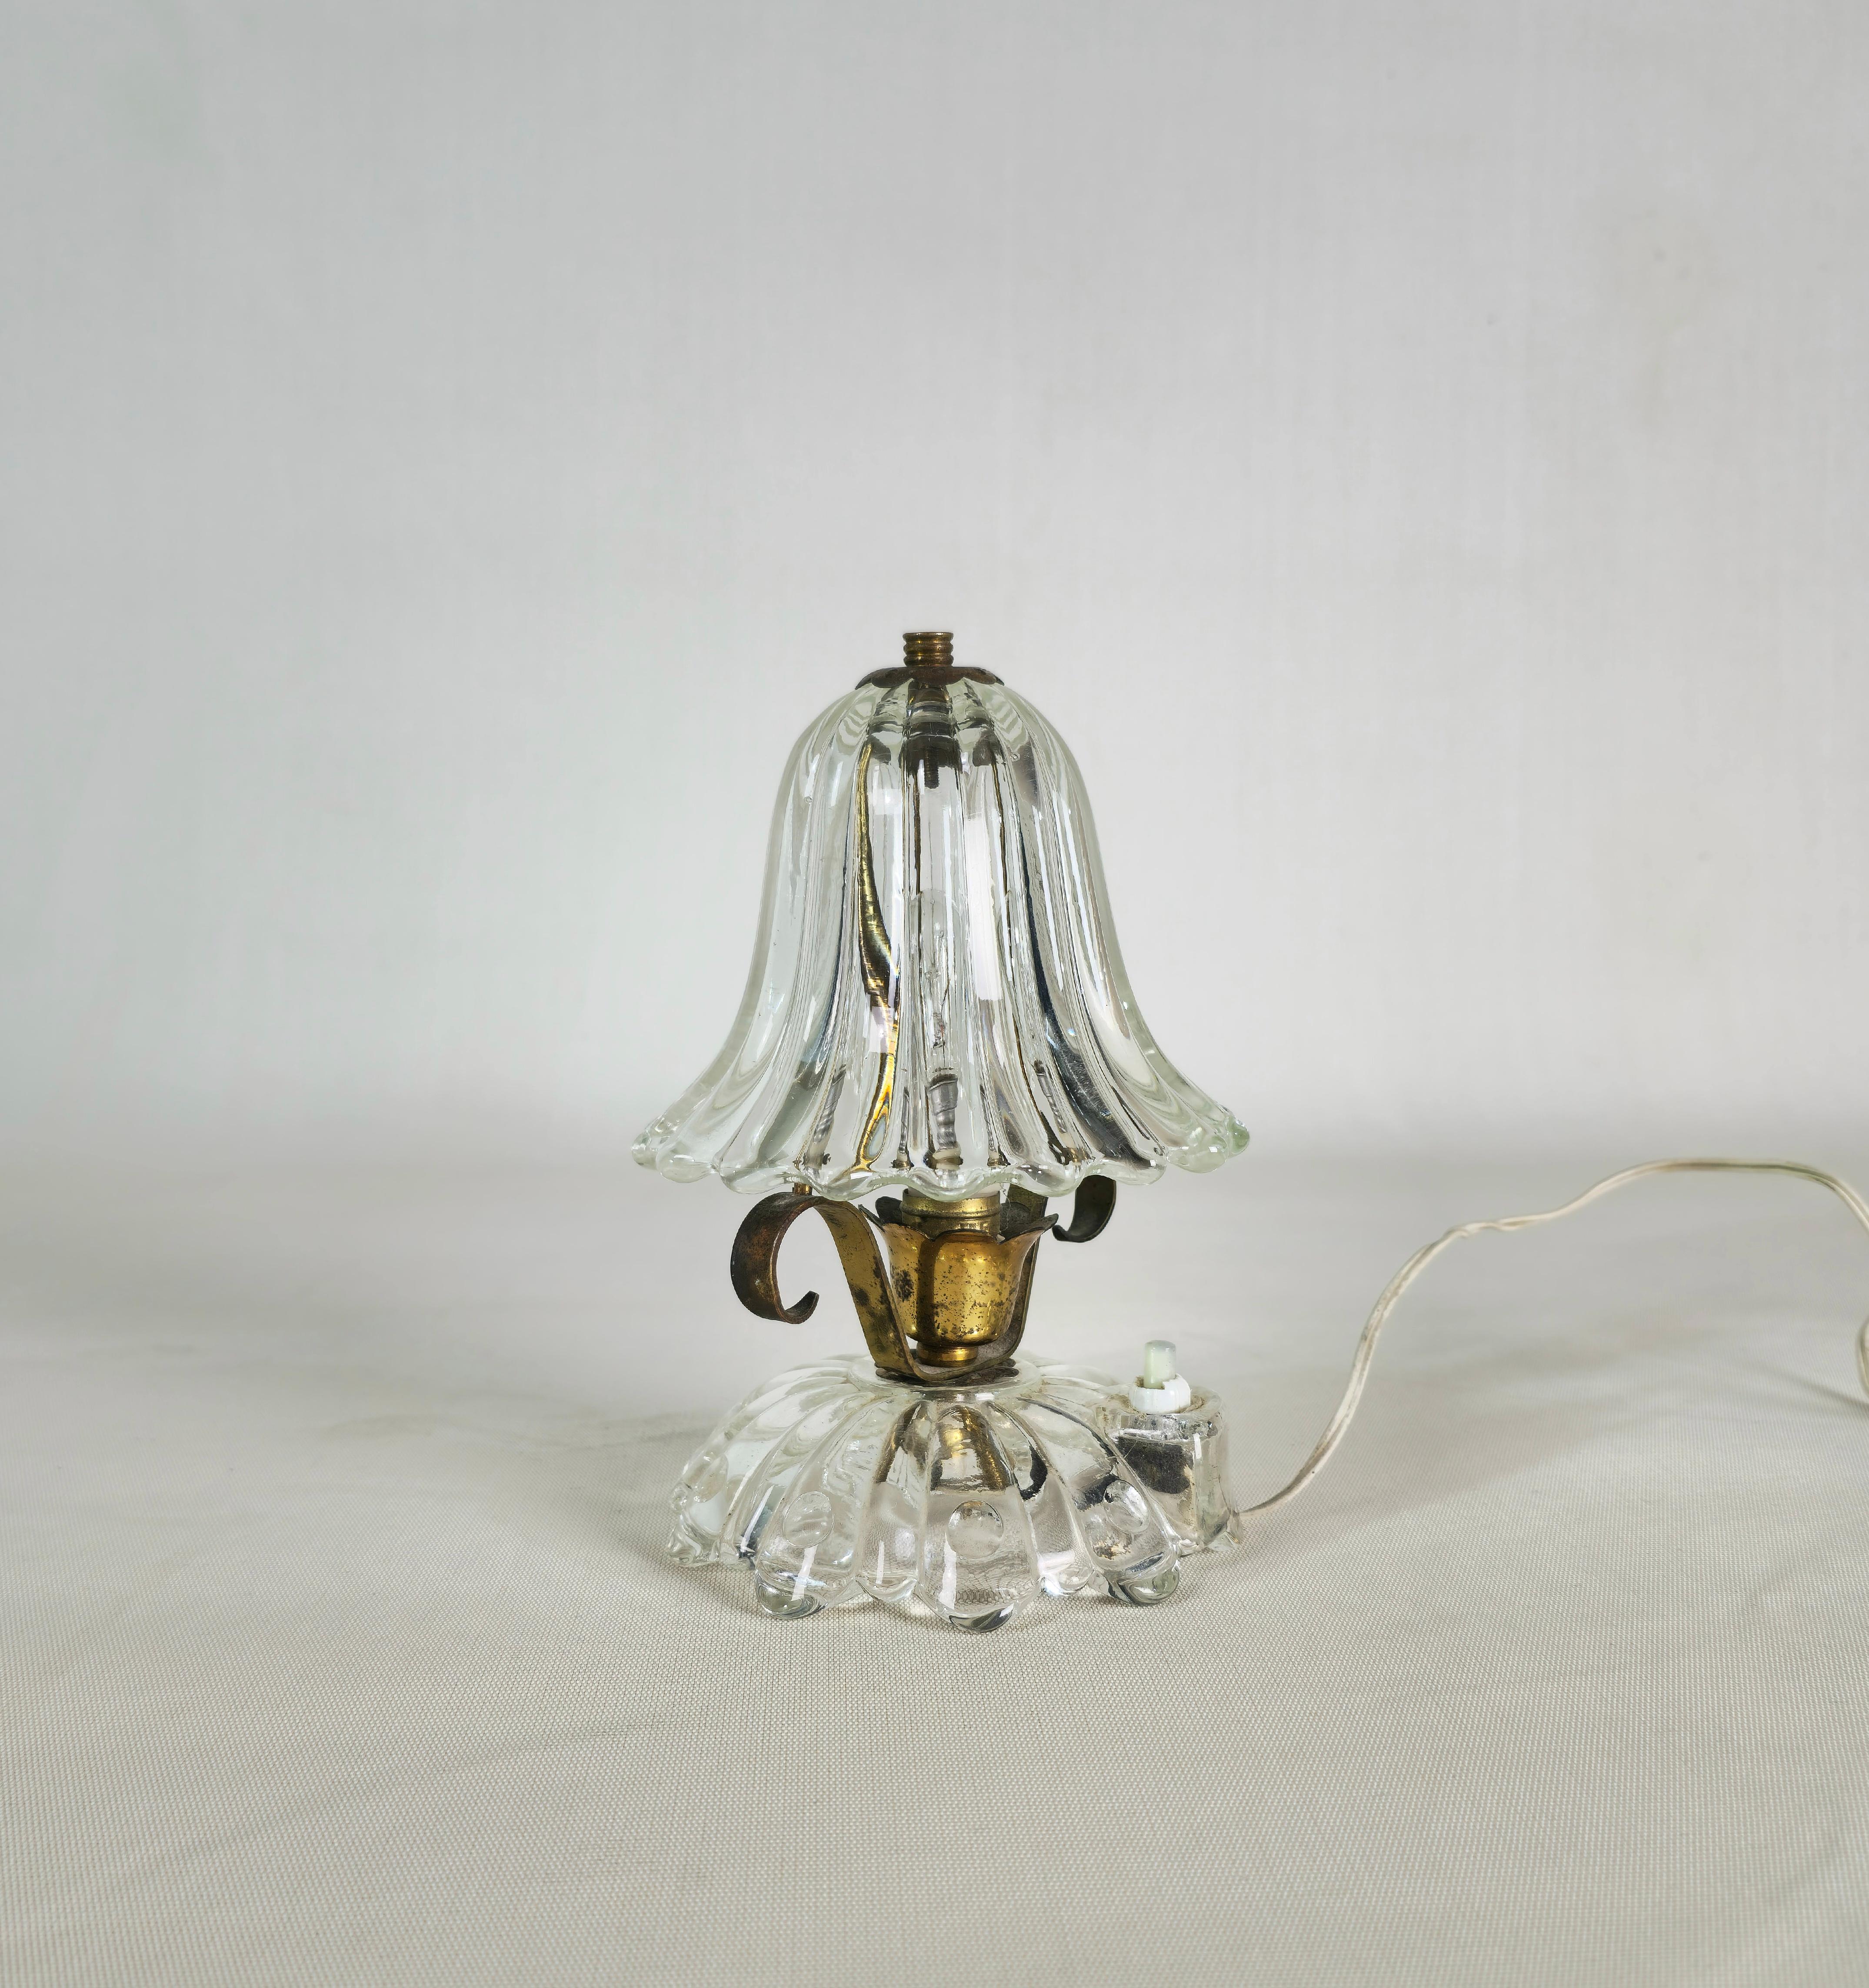 Small table lamp produced in Italy in the 1950s by Barovier and Toso.
The table lamp is made with a brass structure with a Murano glass diffuser and base.


Note: We try to offer our customers an excellent service even in shipments all over the